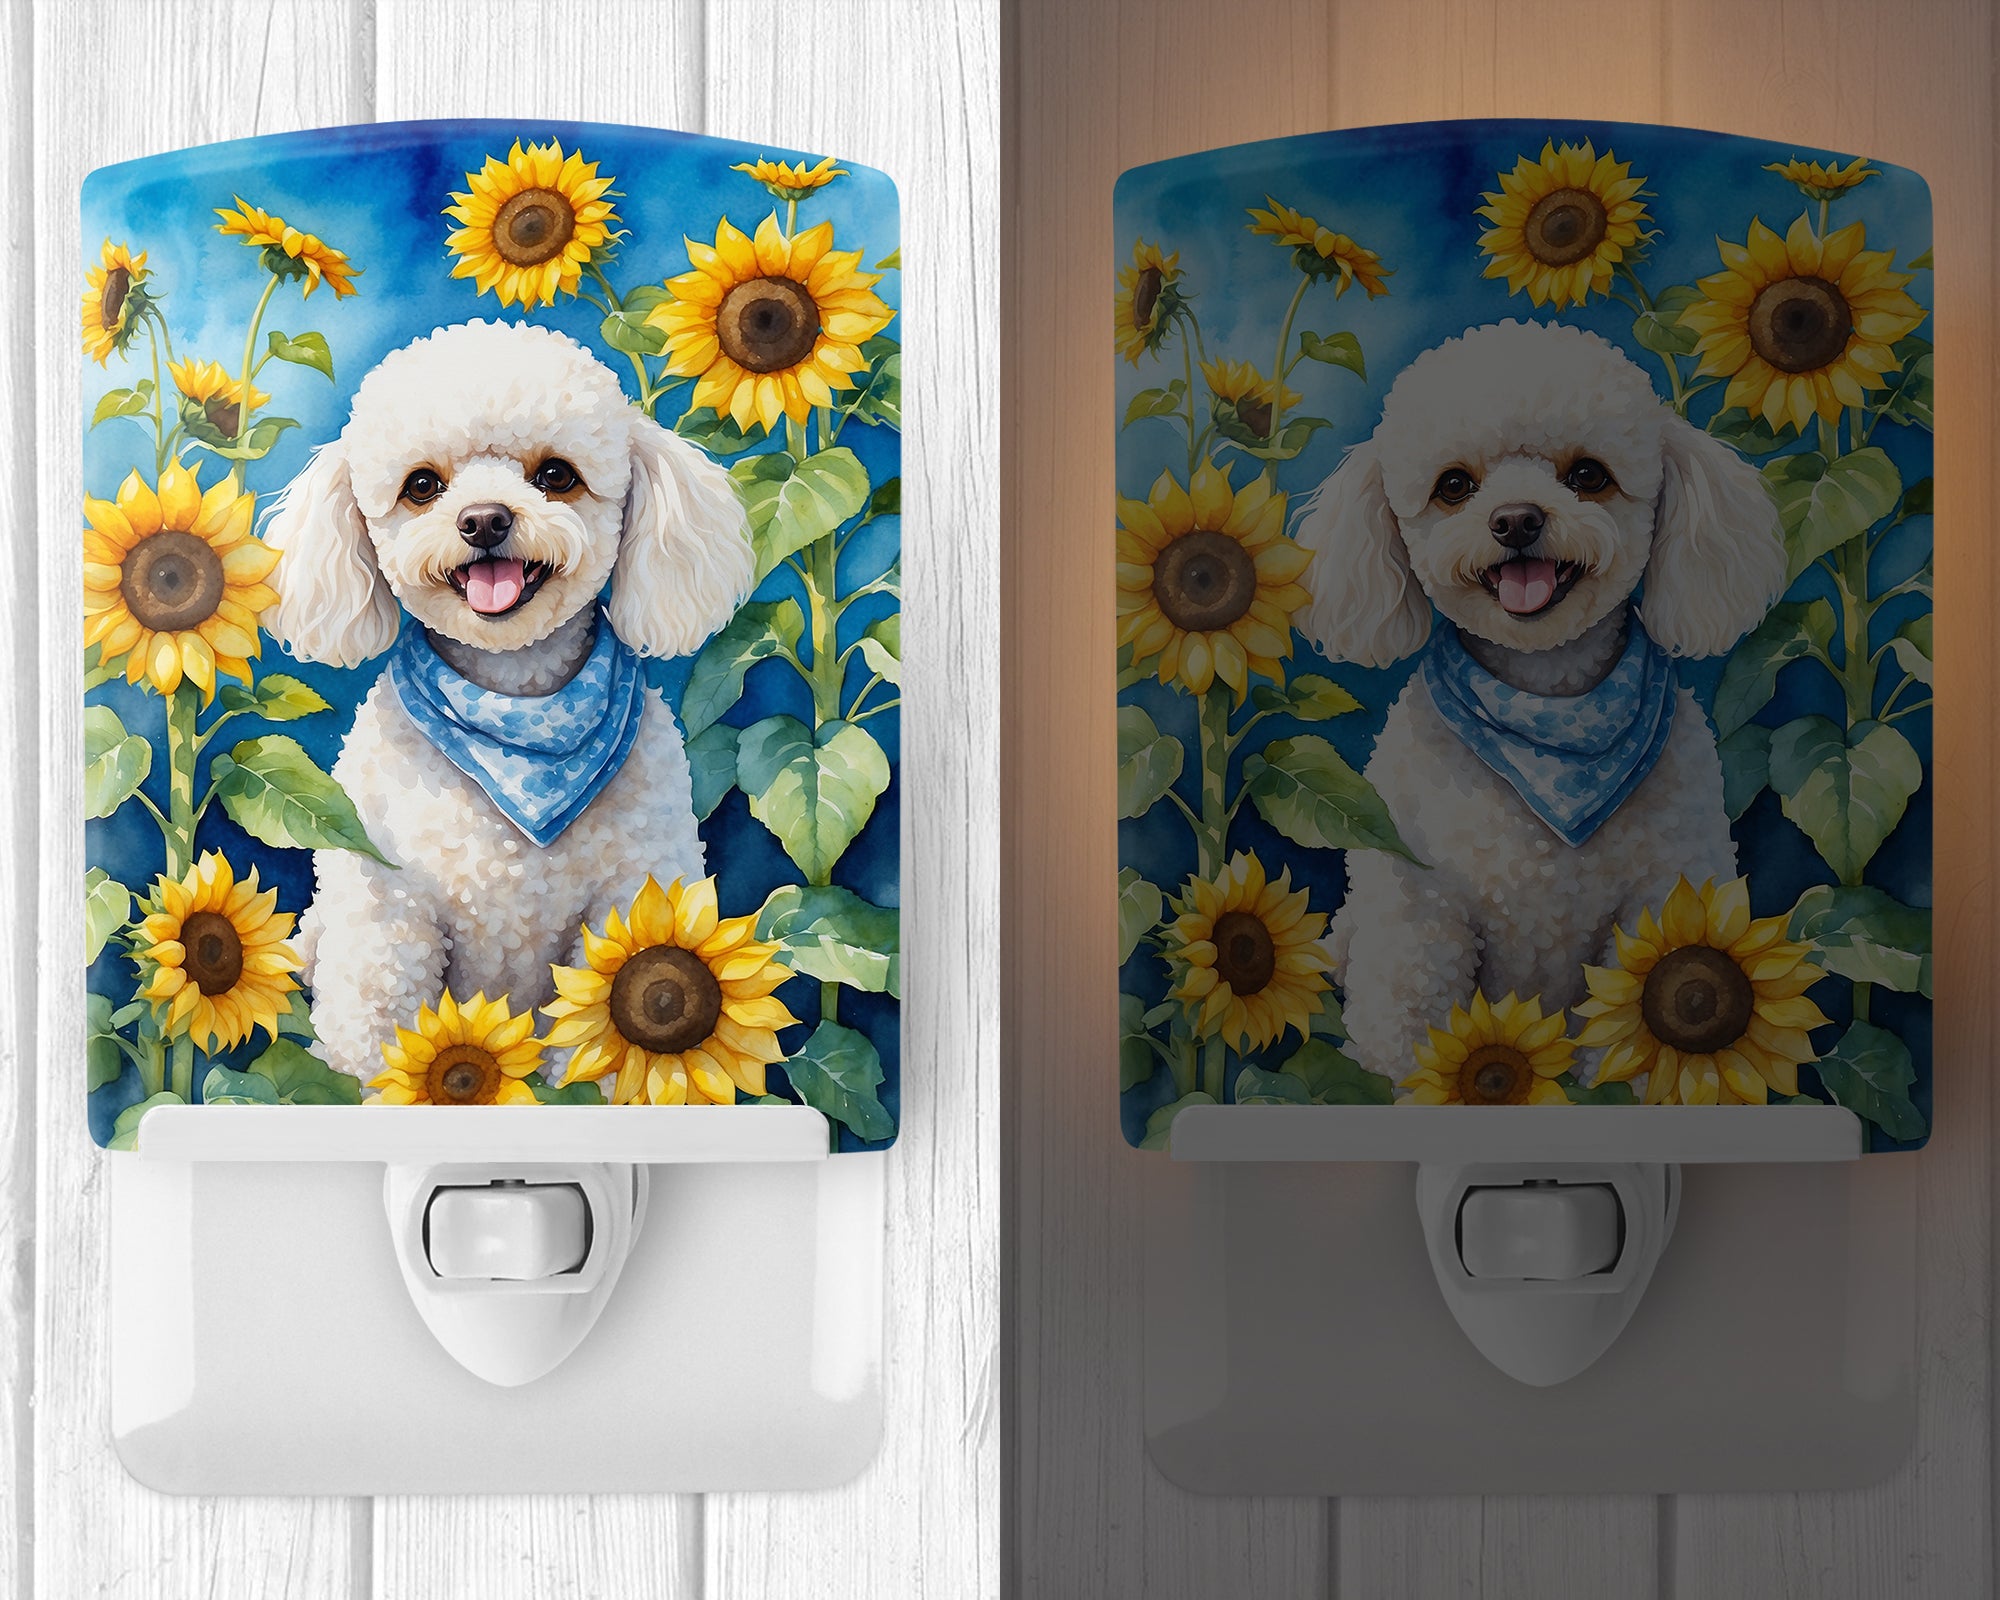 Buy this White Poodle in Sunflowers Ceramic Night Light